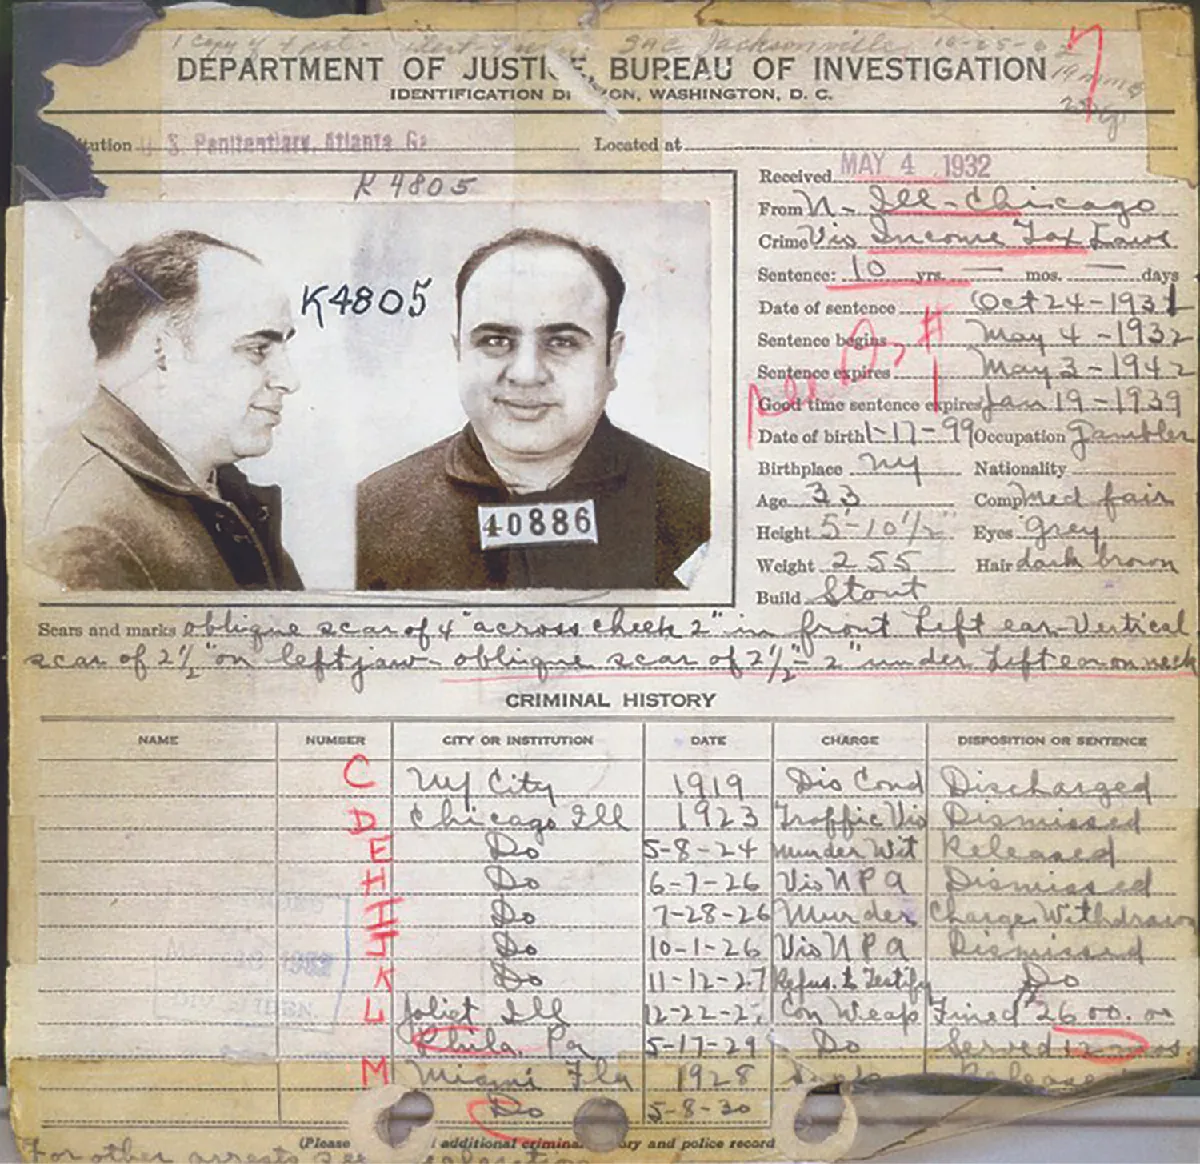 The FBI’s 1932 criminal record on Al Capone shows the many charges against him, most of which were dismissed.